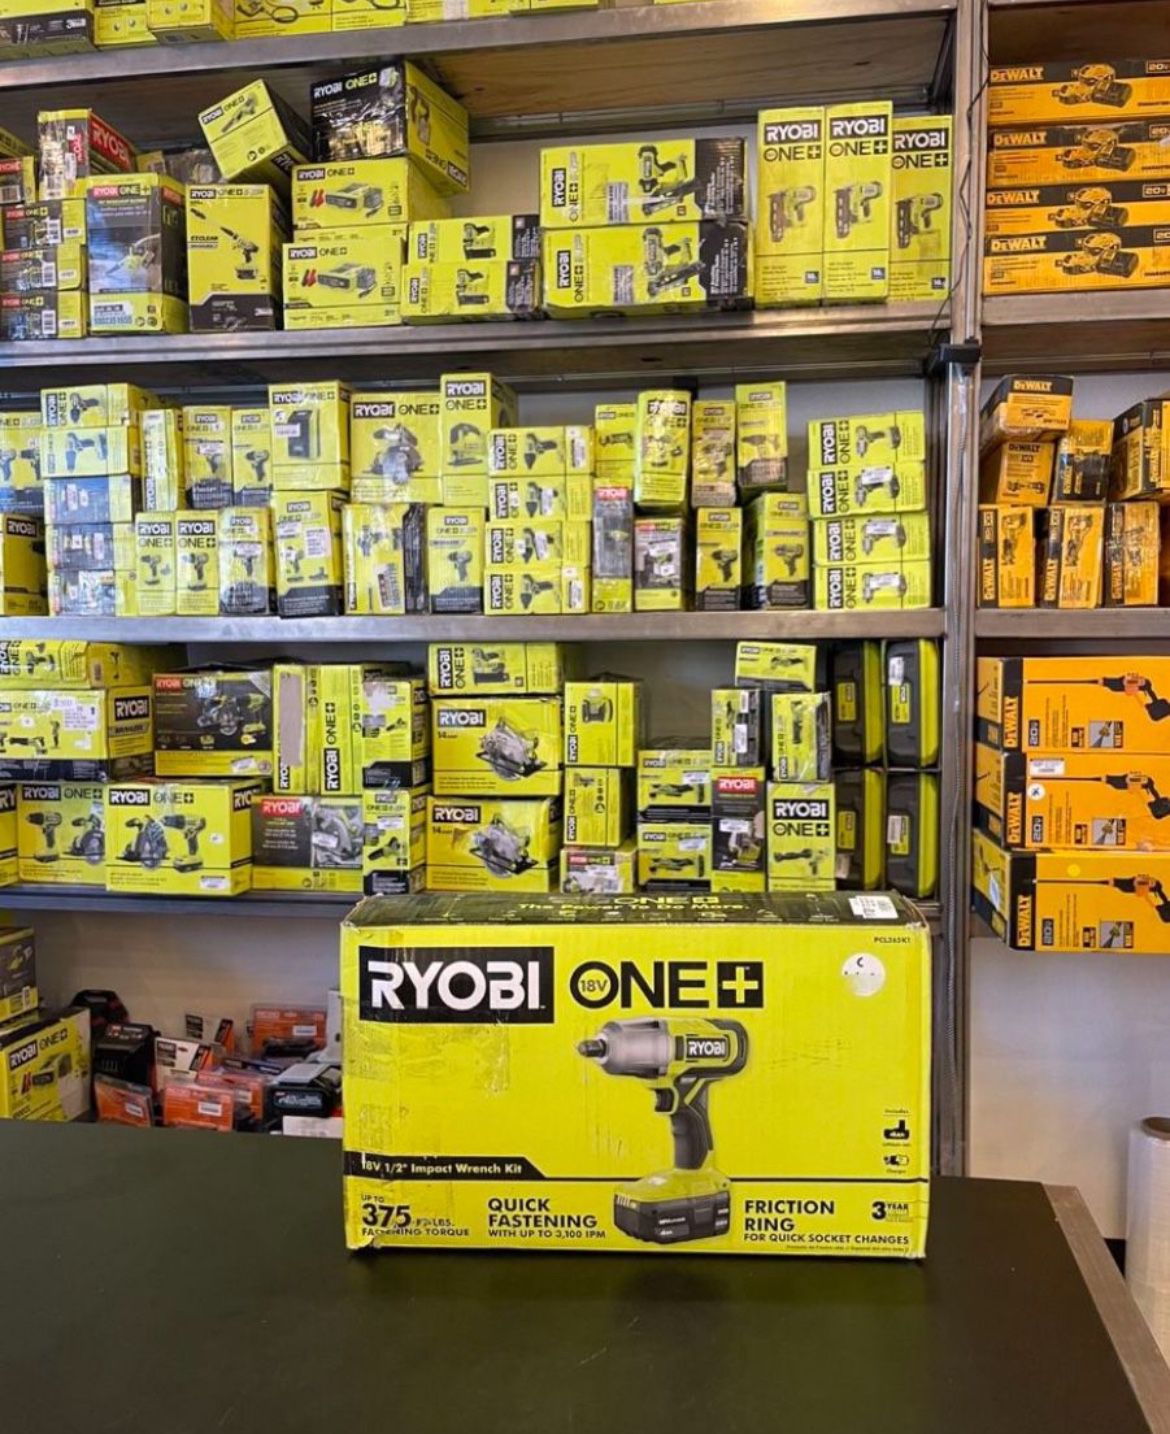 RYOBI ONE+ 18V Cordless 1/2 in. Impact Wrench Kit with 4.0 Ah Battery and Charger PCL265k1